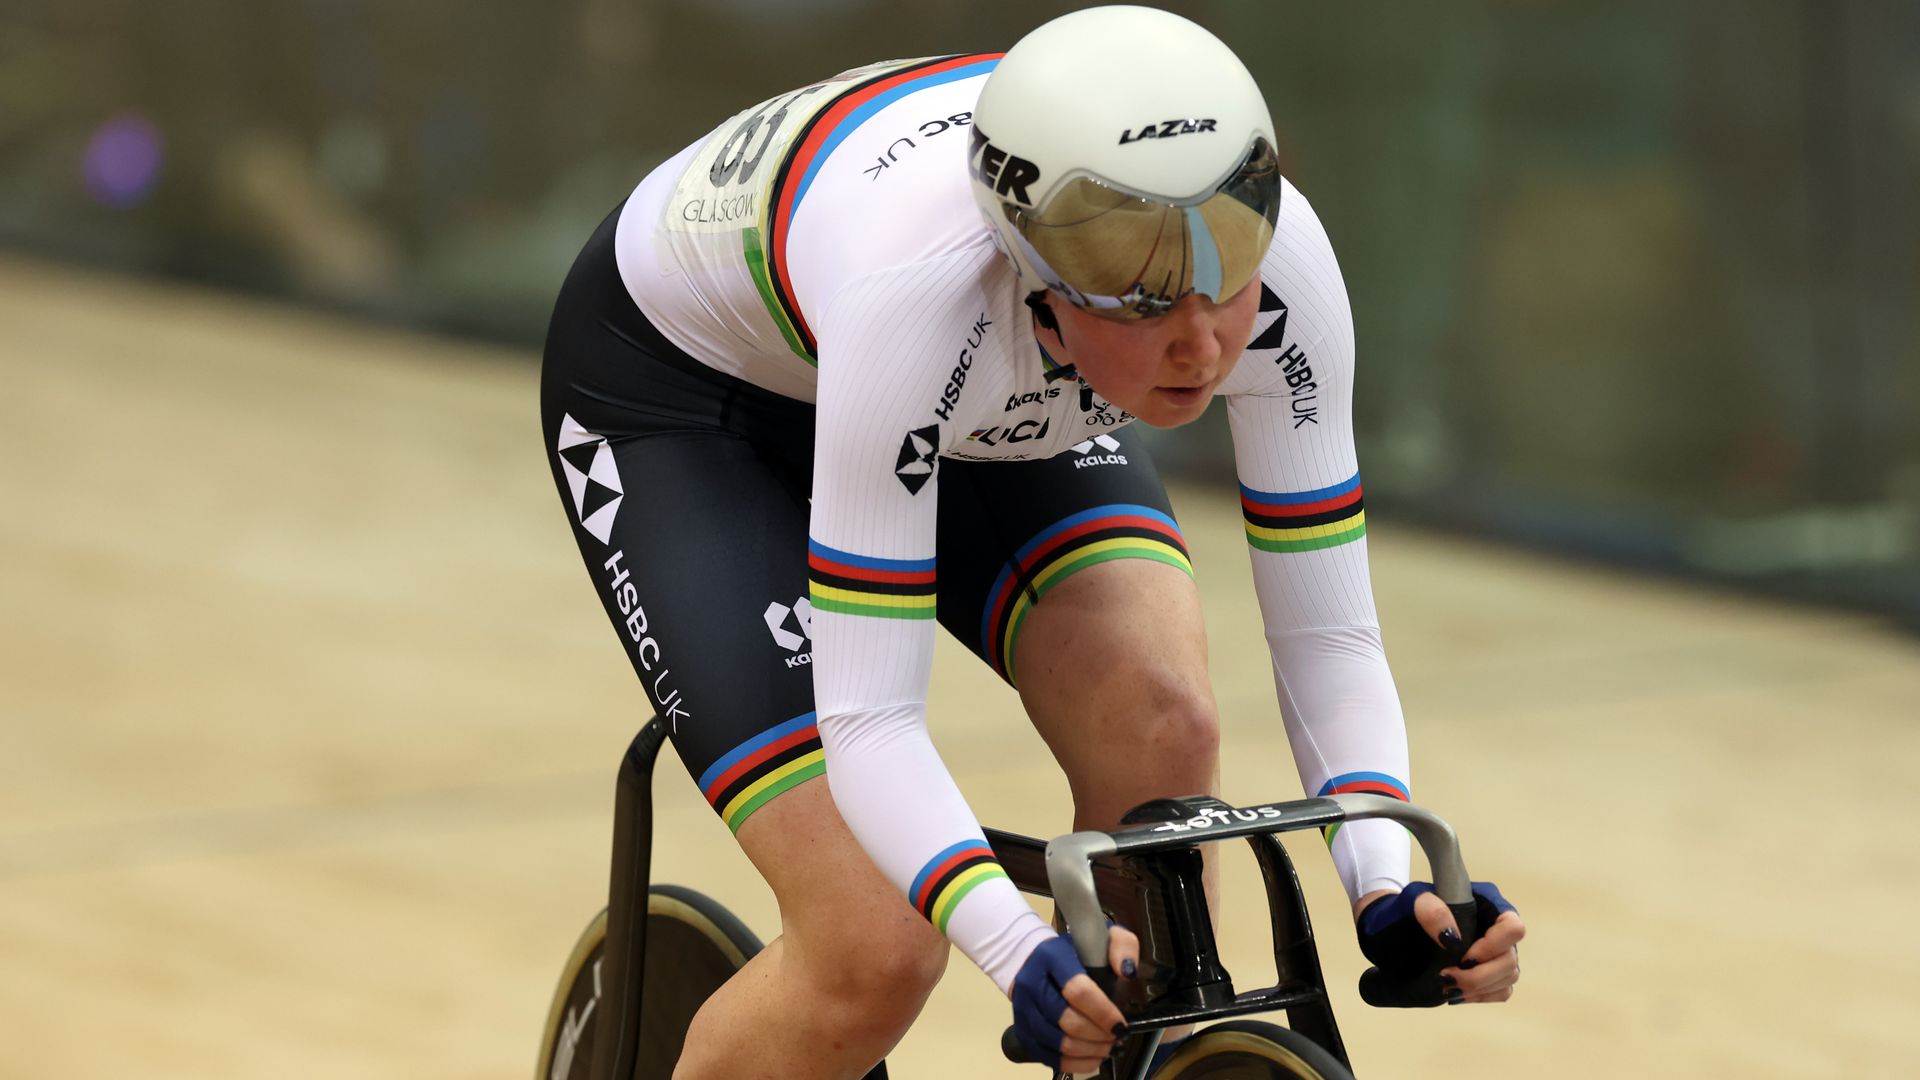 Olympic champion Archibald suffers ankle injuries in road accident